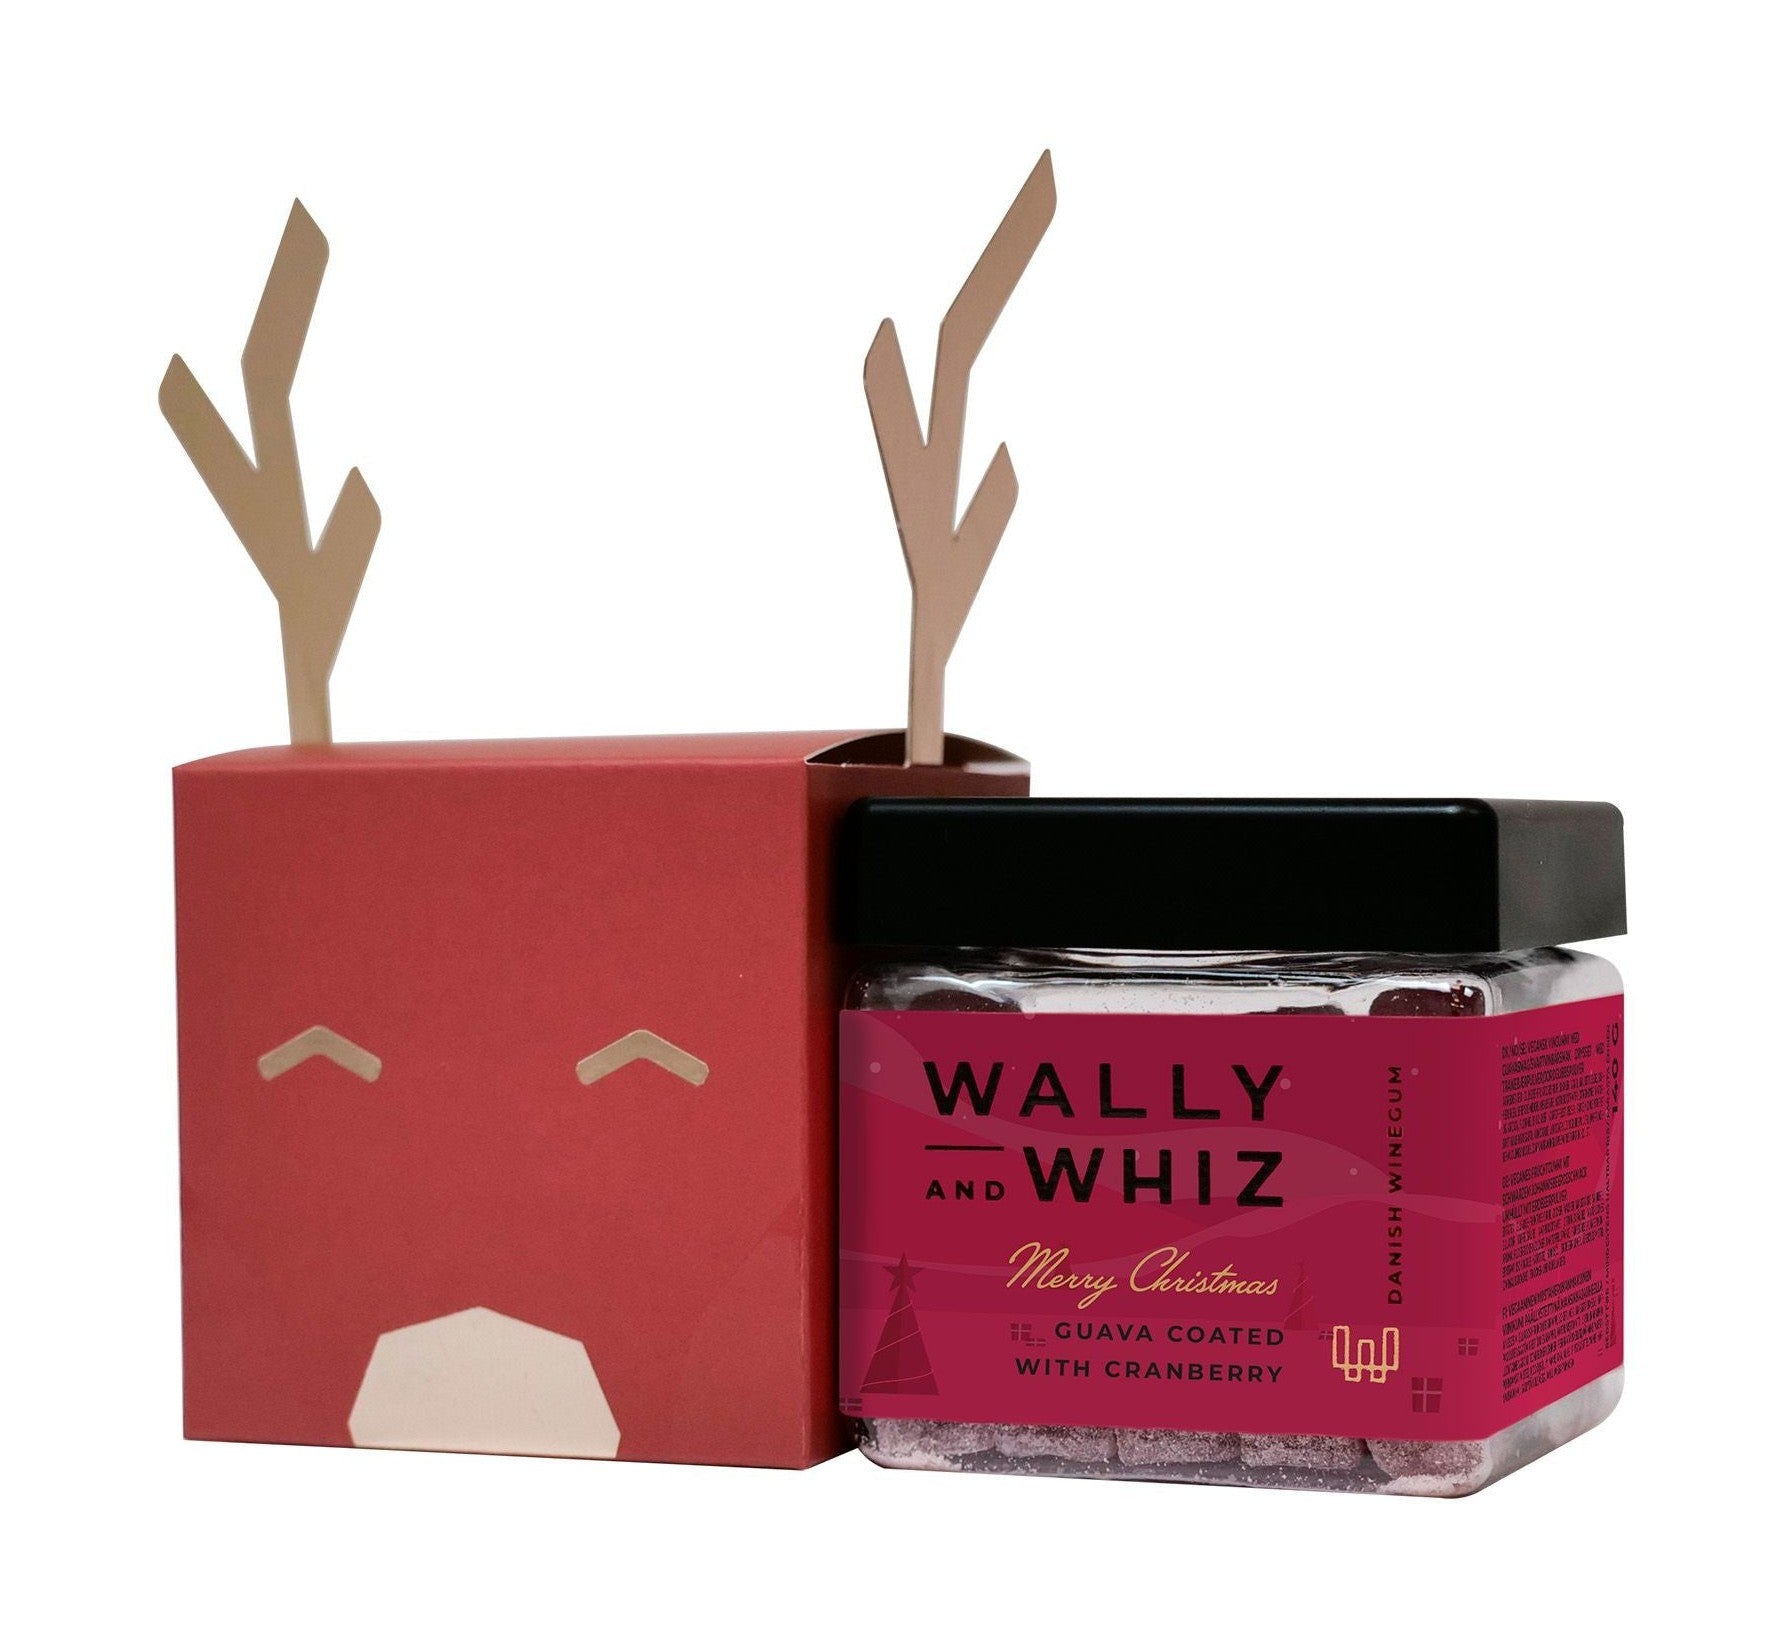 Wally And Whiz Reindeer rouge 1 petit cube goyave W Cranberry 140g